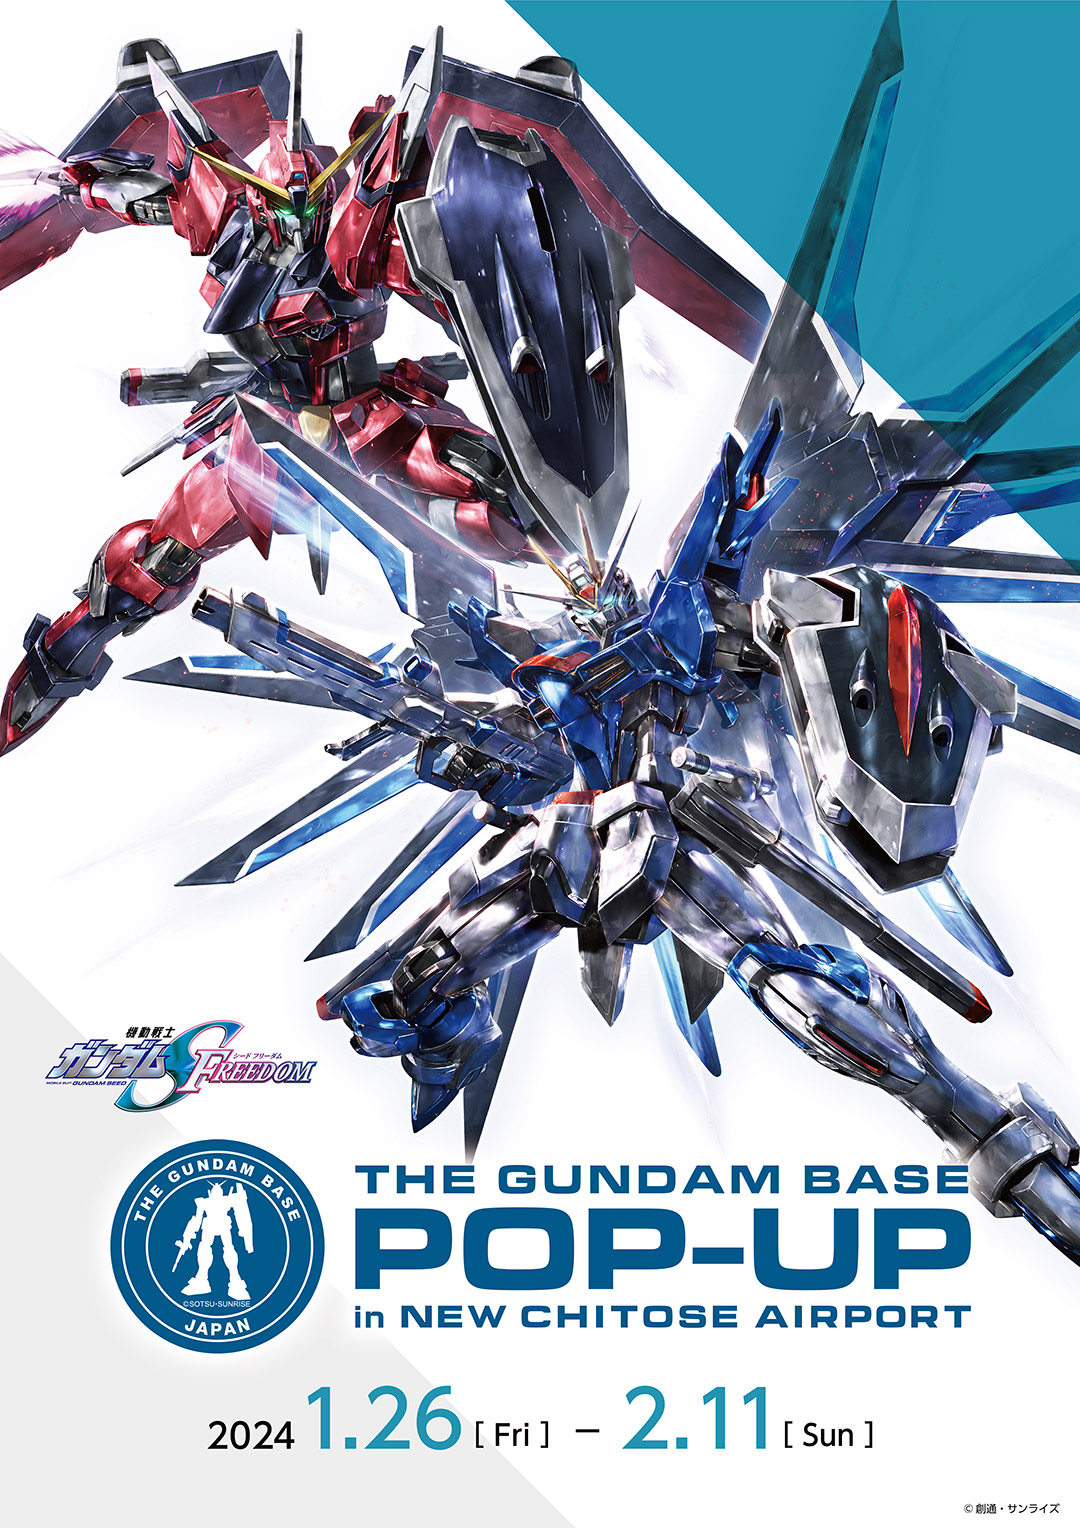 THE GUNDAM BASE POP-UP in NEW CHITOSE AIRPORT